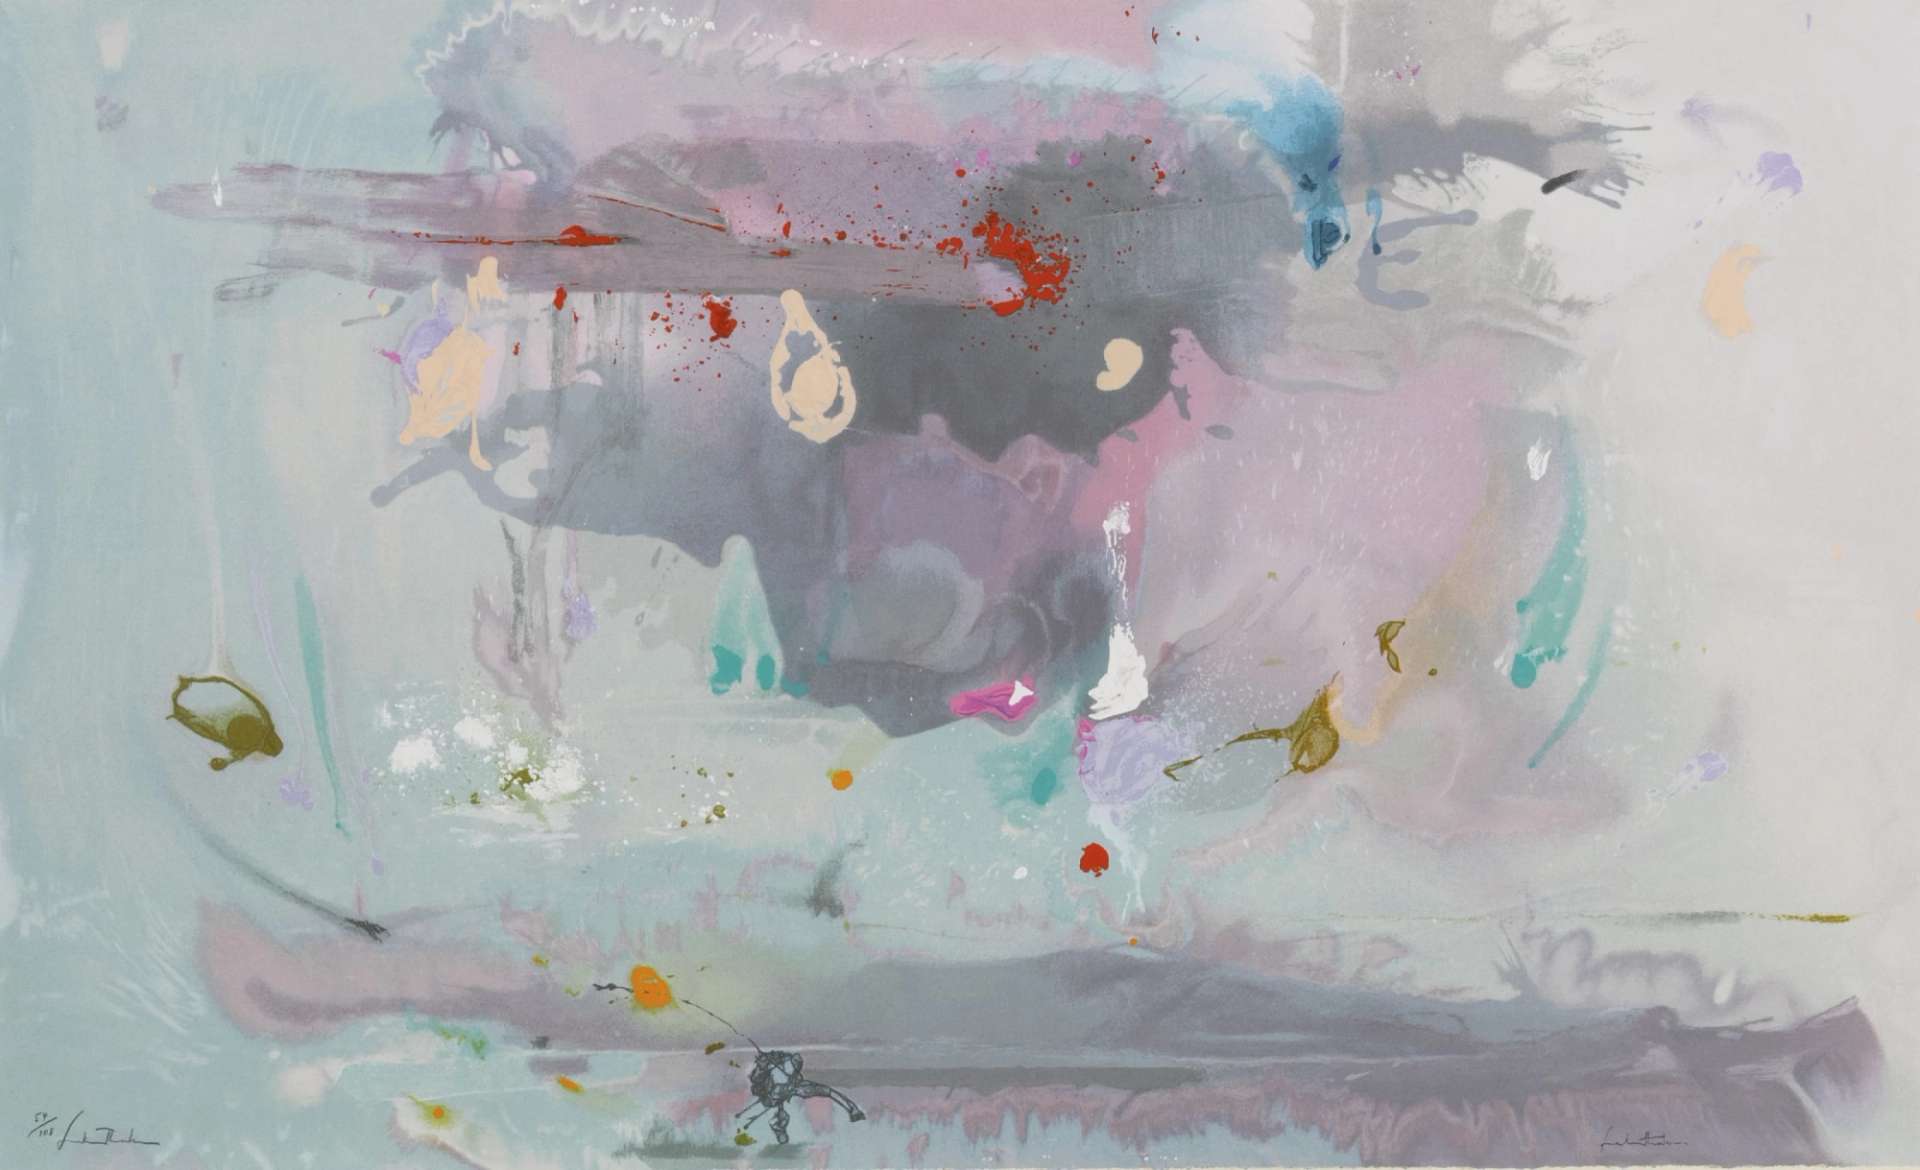 Helen Frankenthaler’s Grey Fireworks. An abstract expressionist screenprint of a grey background with spots of various colours